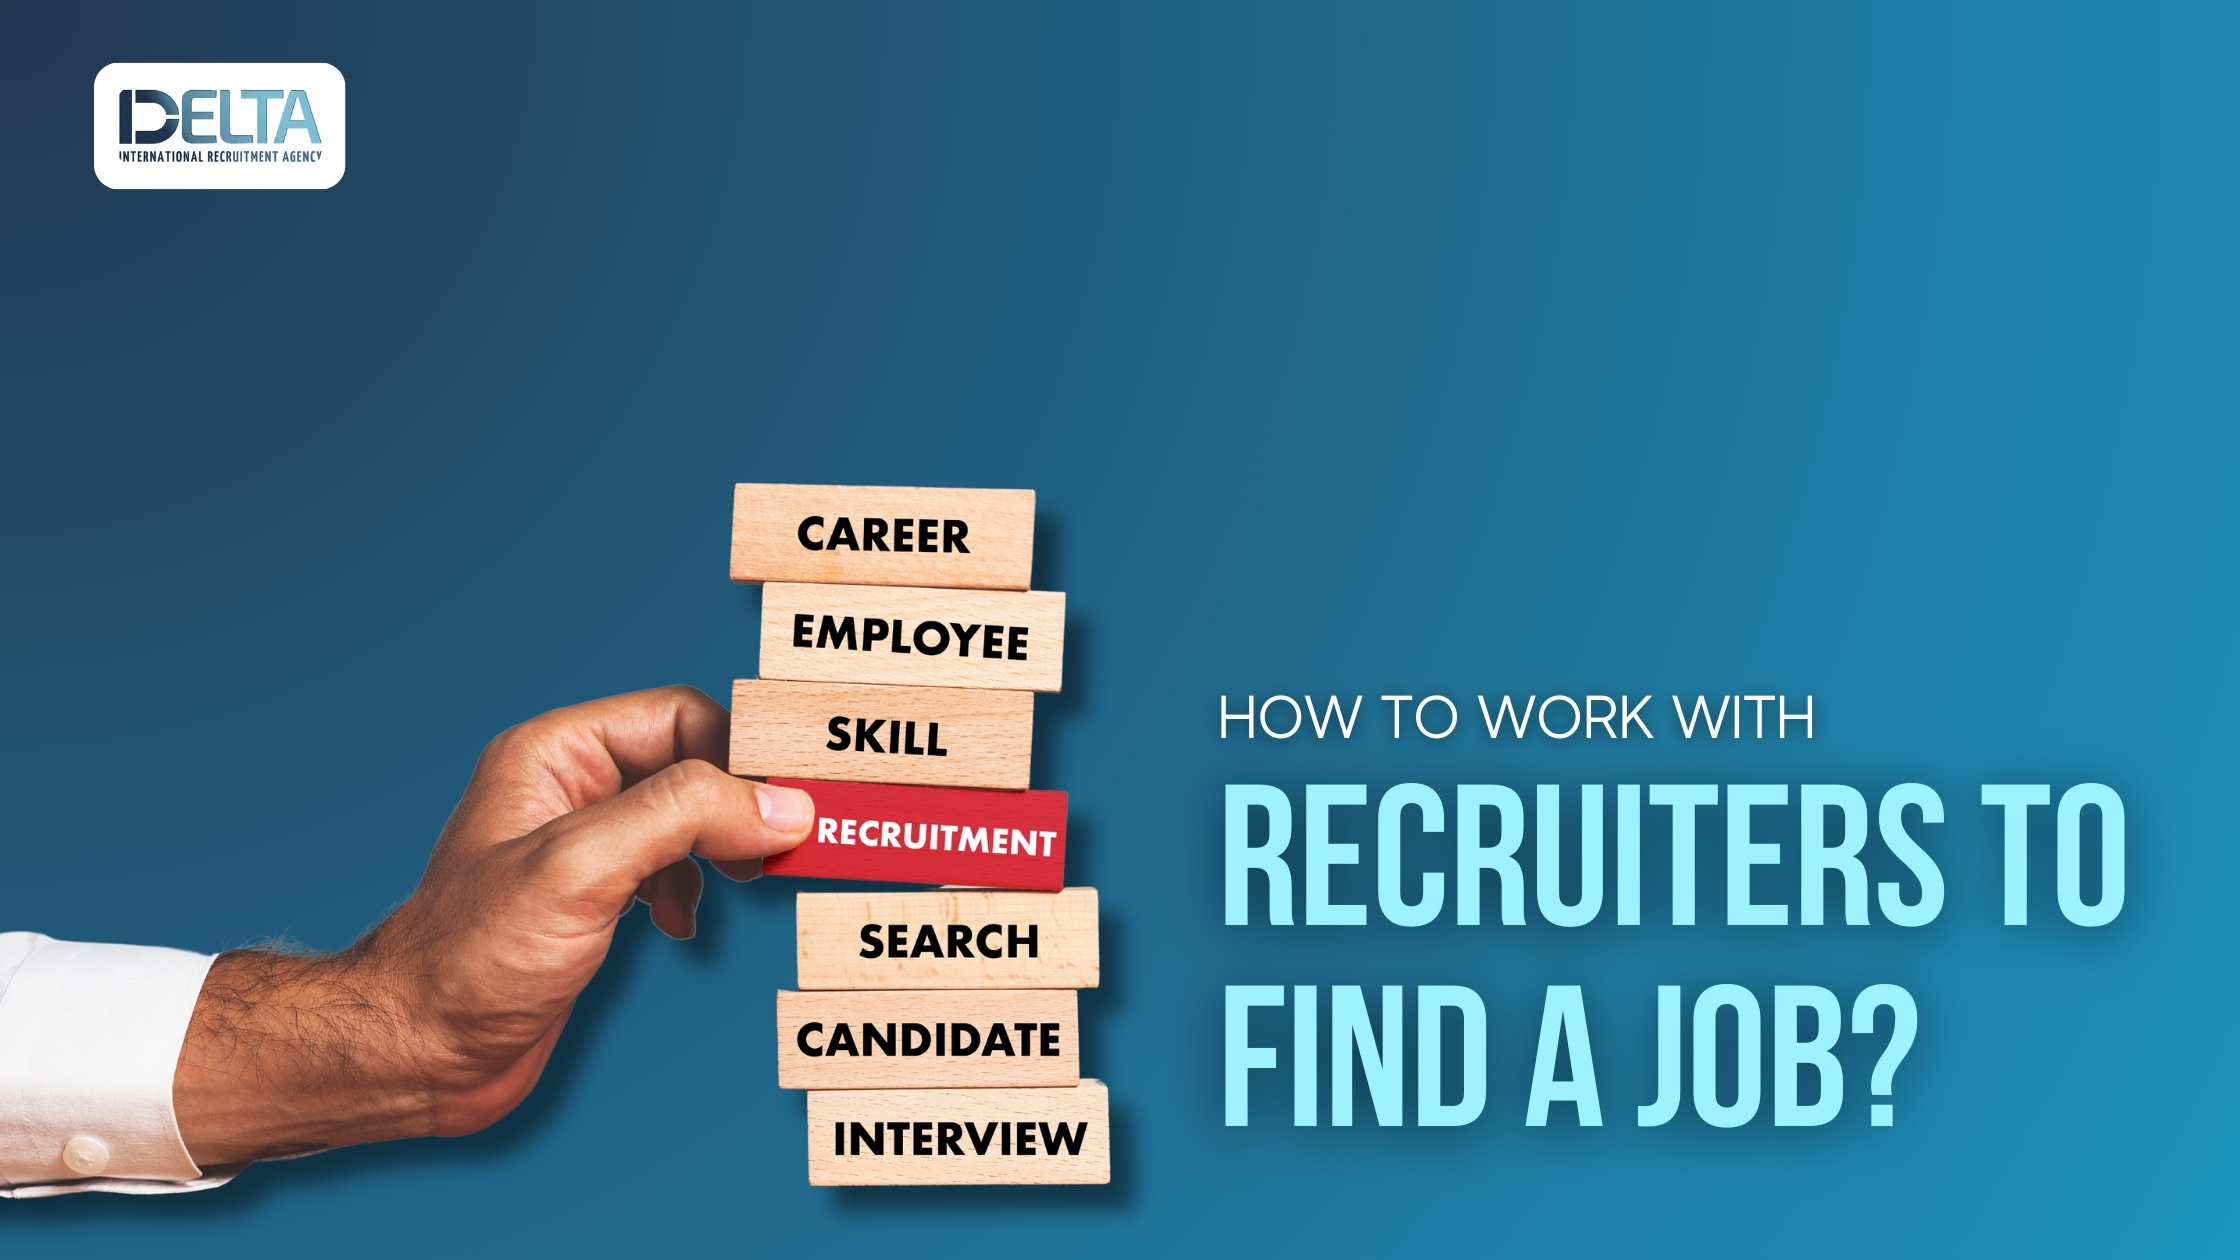 How to Work with Recruiters to Find a Job?